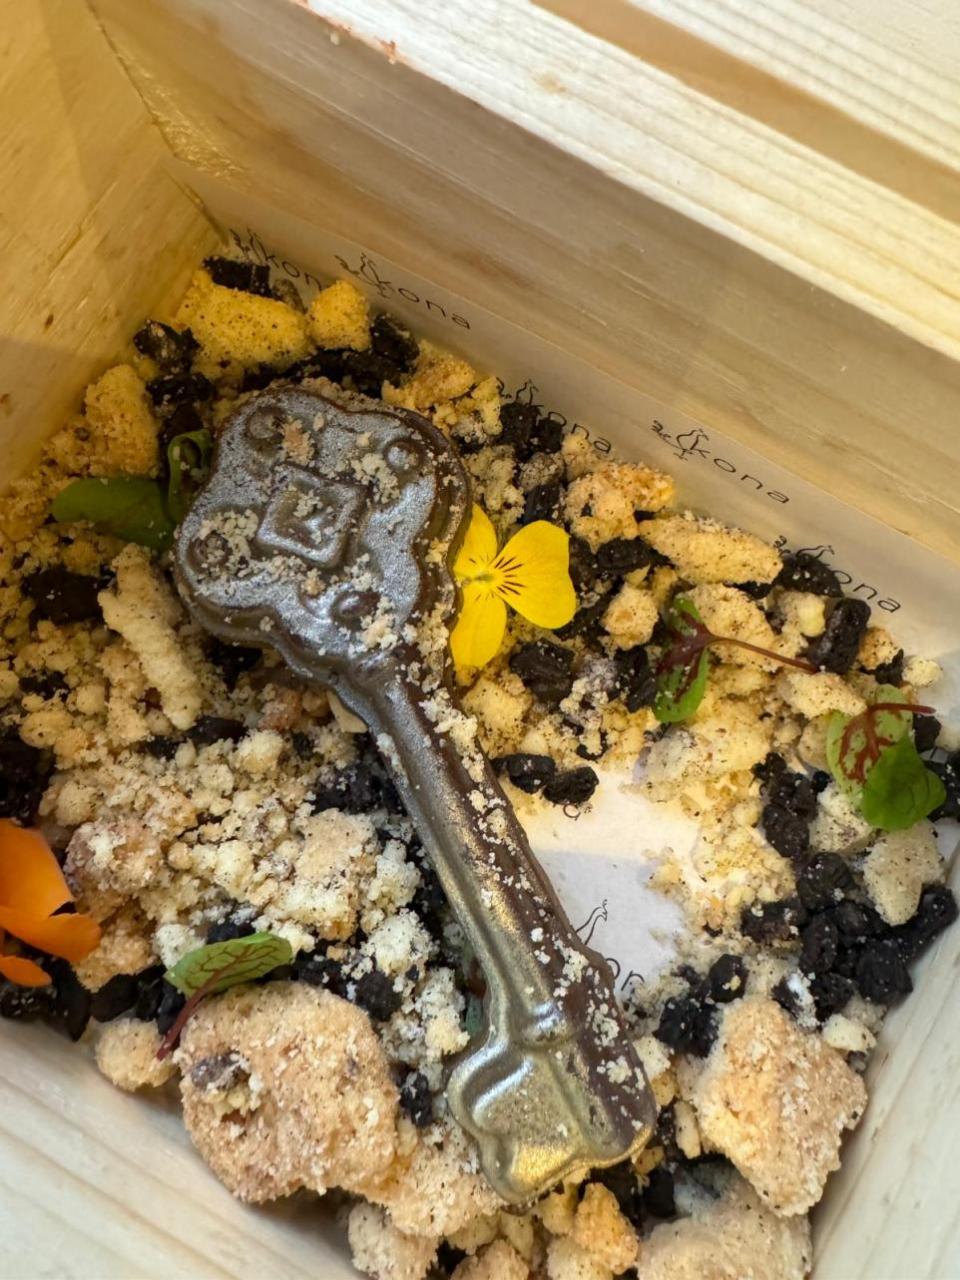 News Shopper: A box contained the ornate key Mary finds, made from decadent chocolate, to unlock the gate.